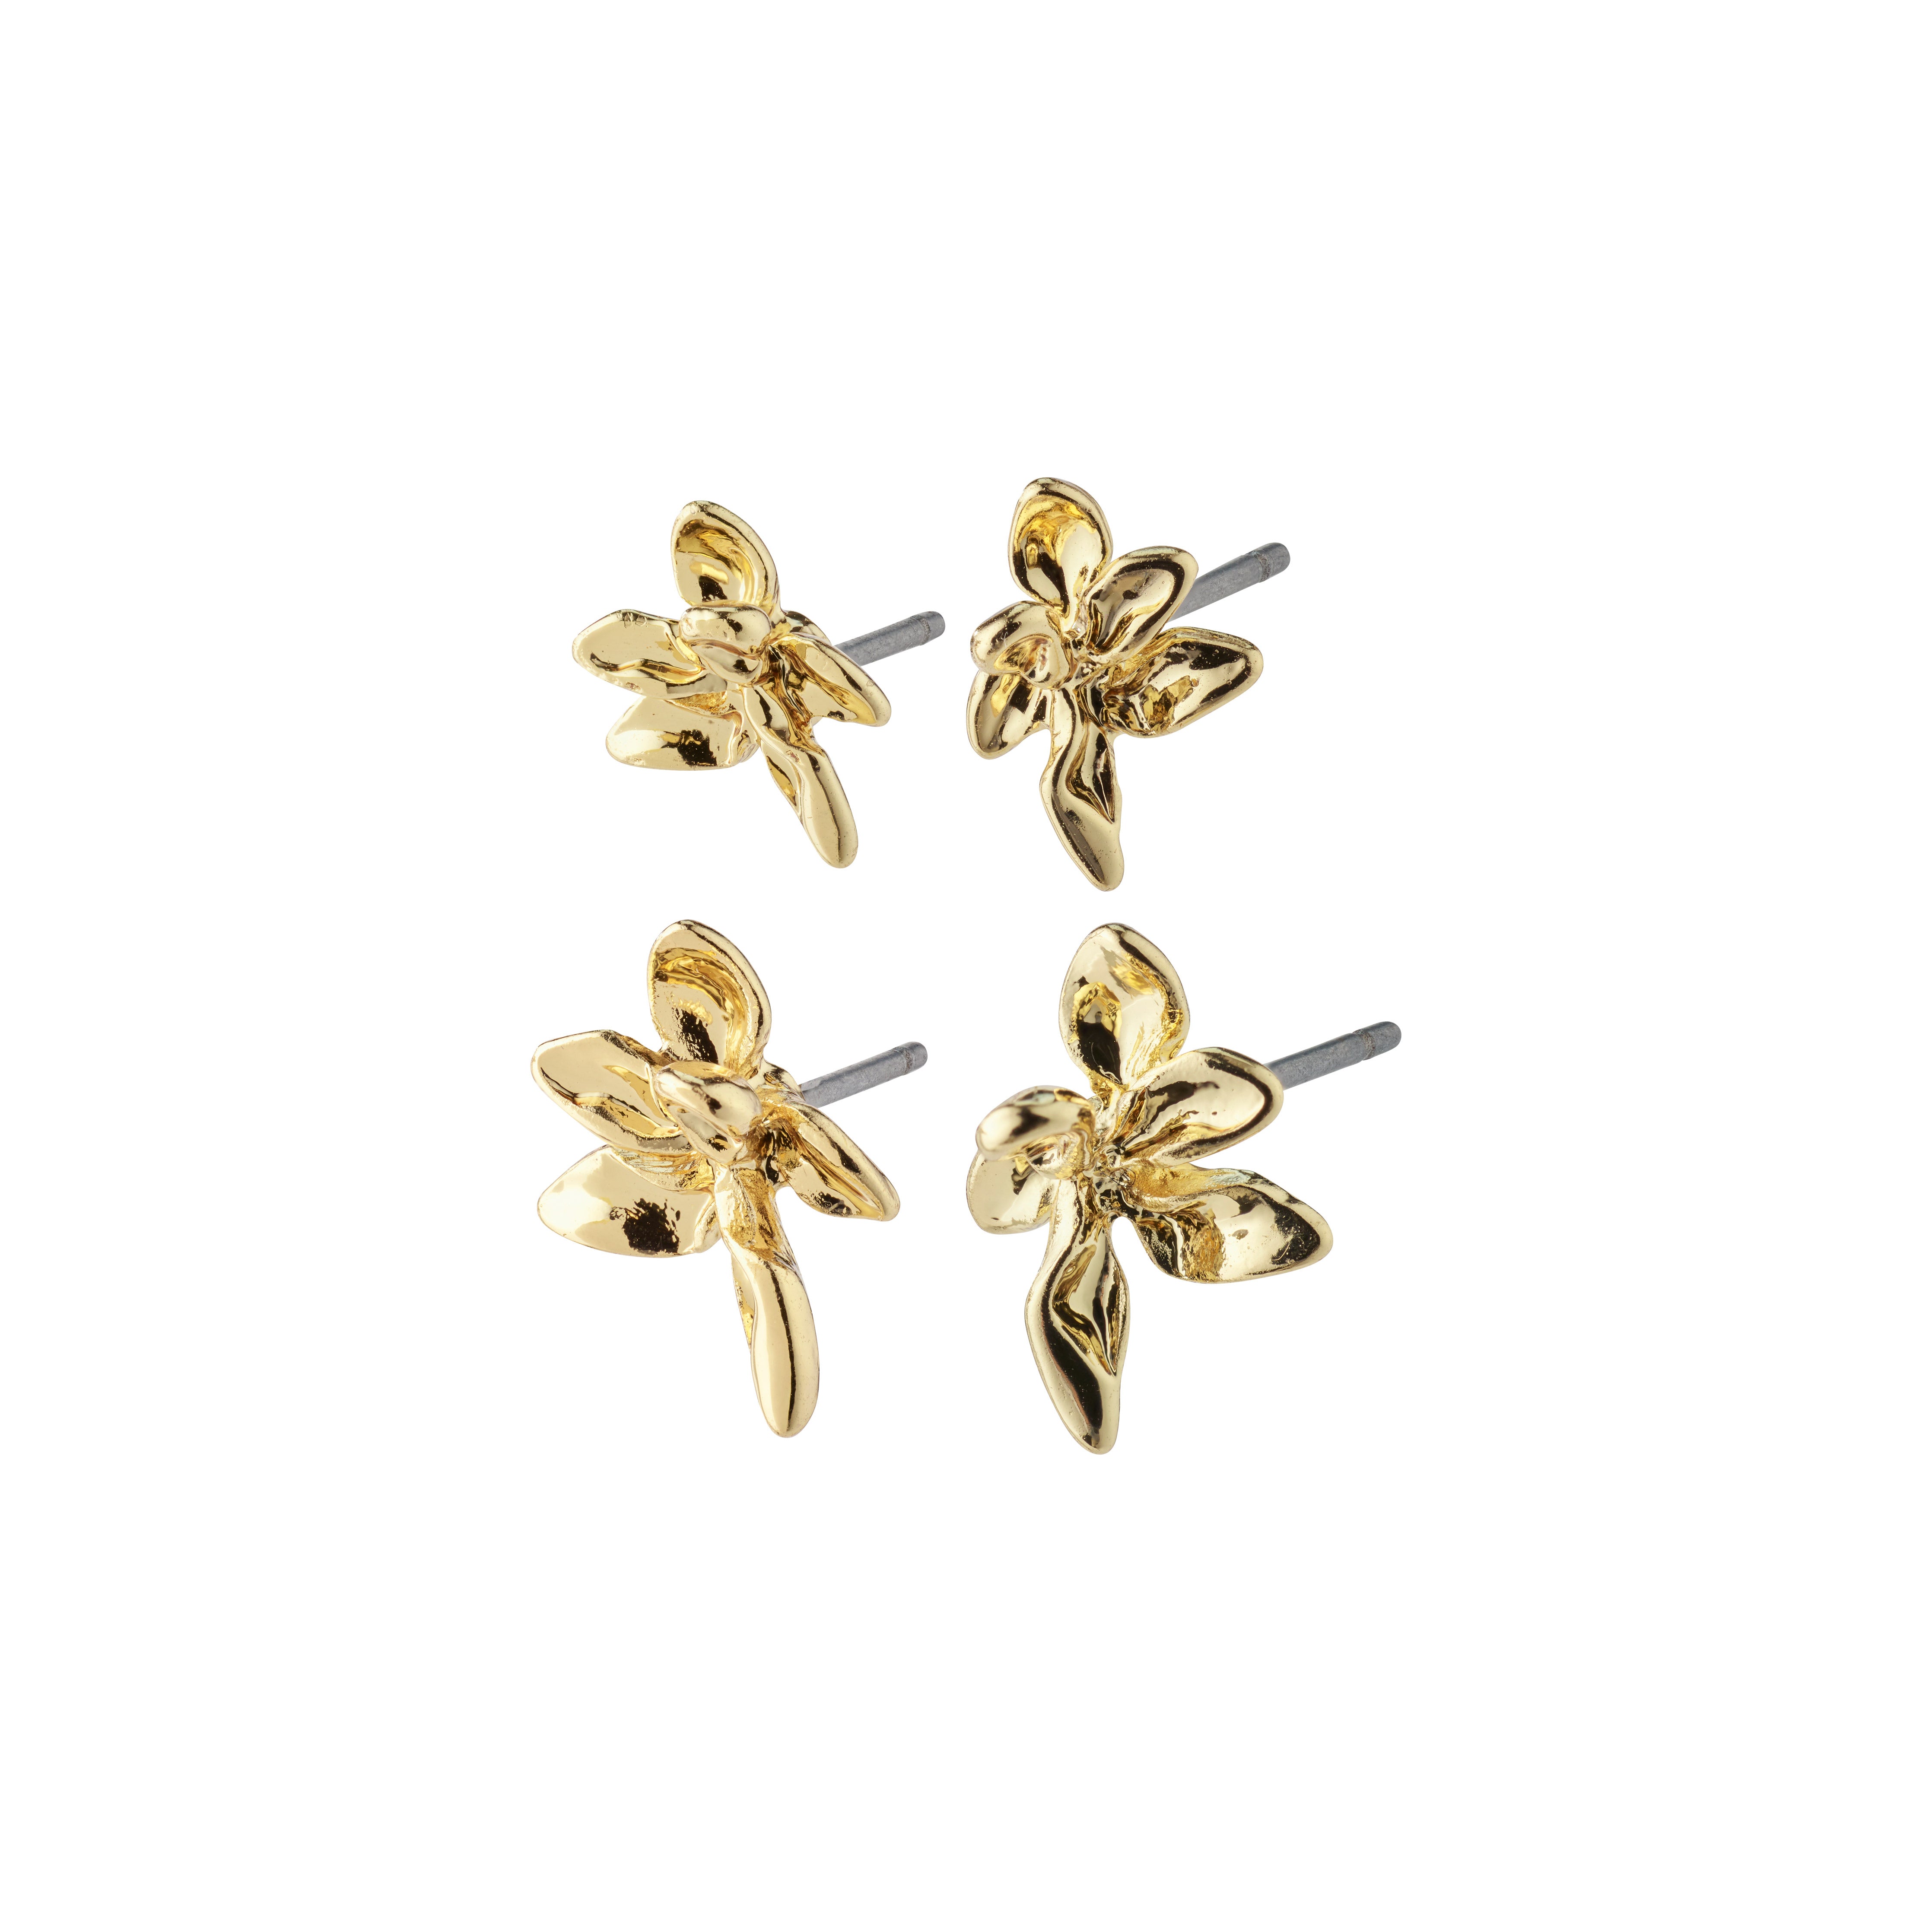 RIKO recycled earrings, 2-in-1 set, gold-plated